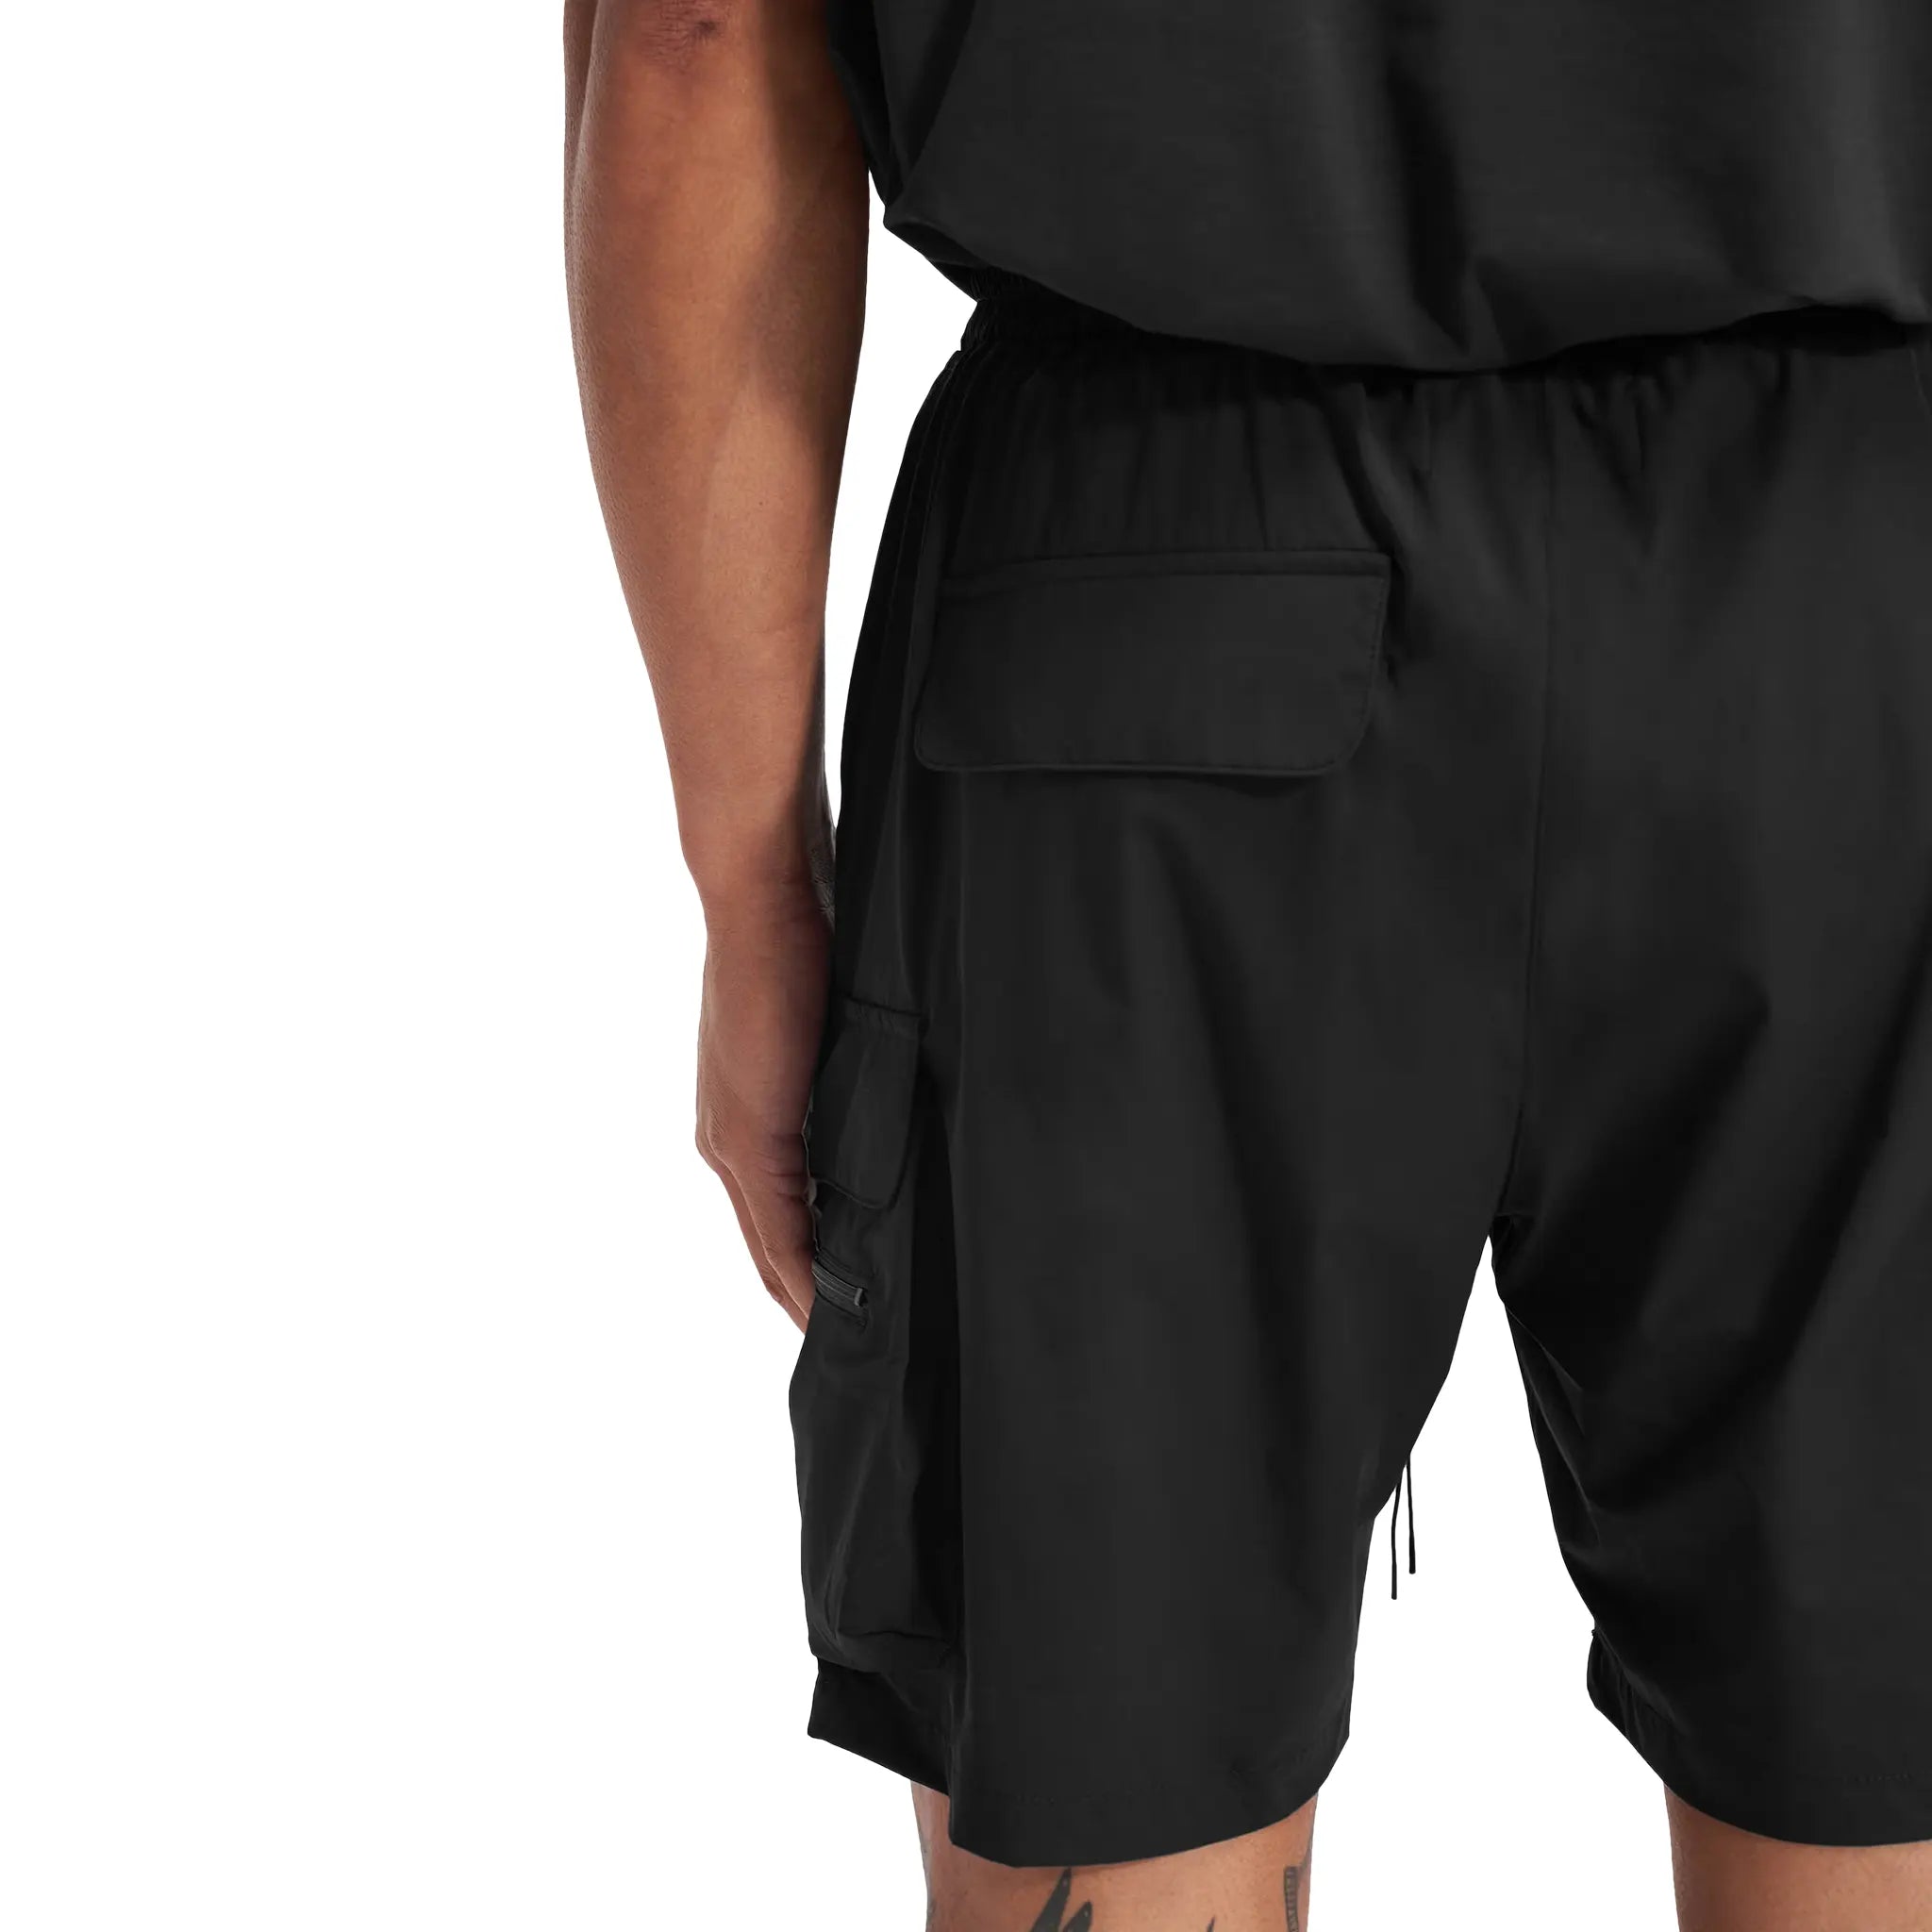 Back Detail view of Represent 247 Black Shorts M09048-01